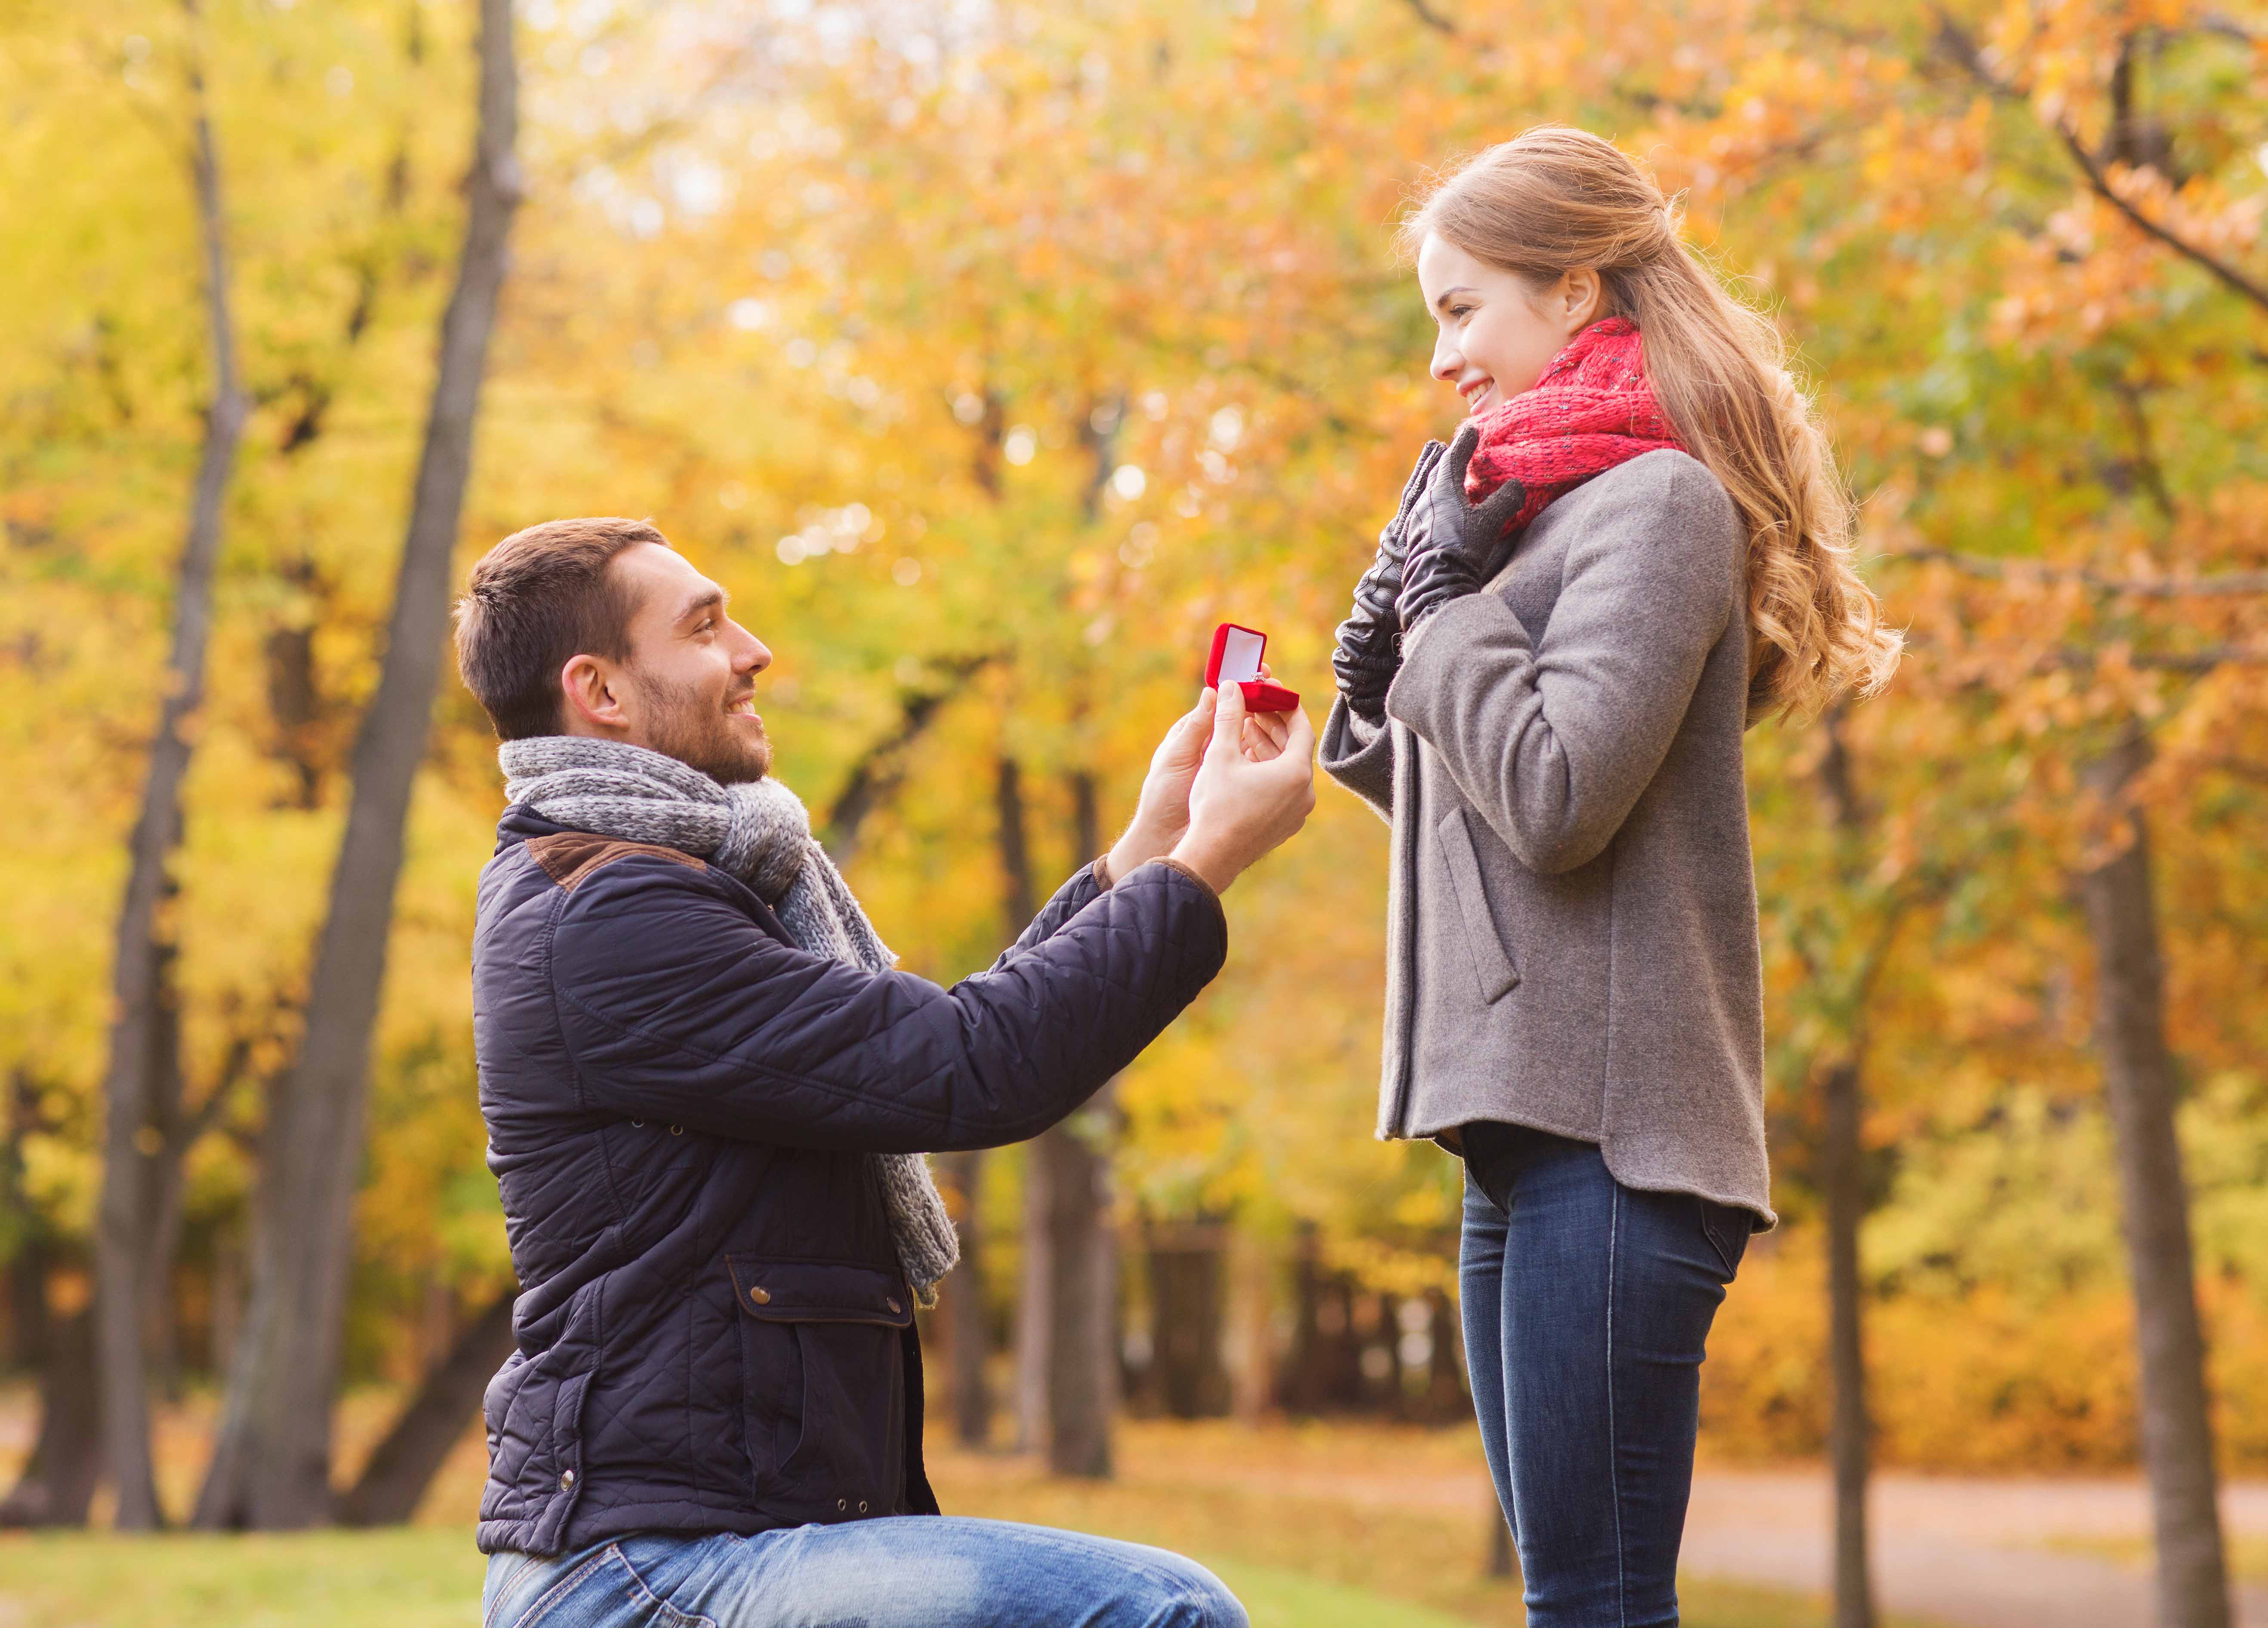 love, family, autumn and people concept - smiling couple with engagement ring in small red gift box outdoors